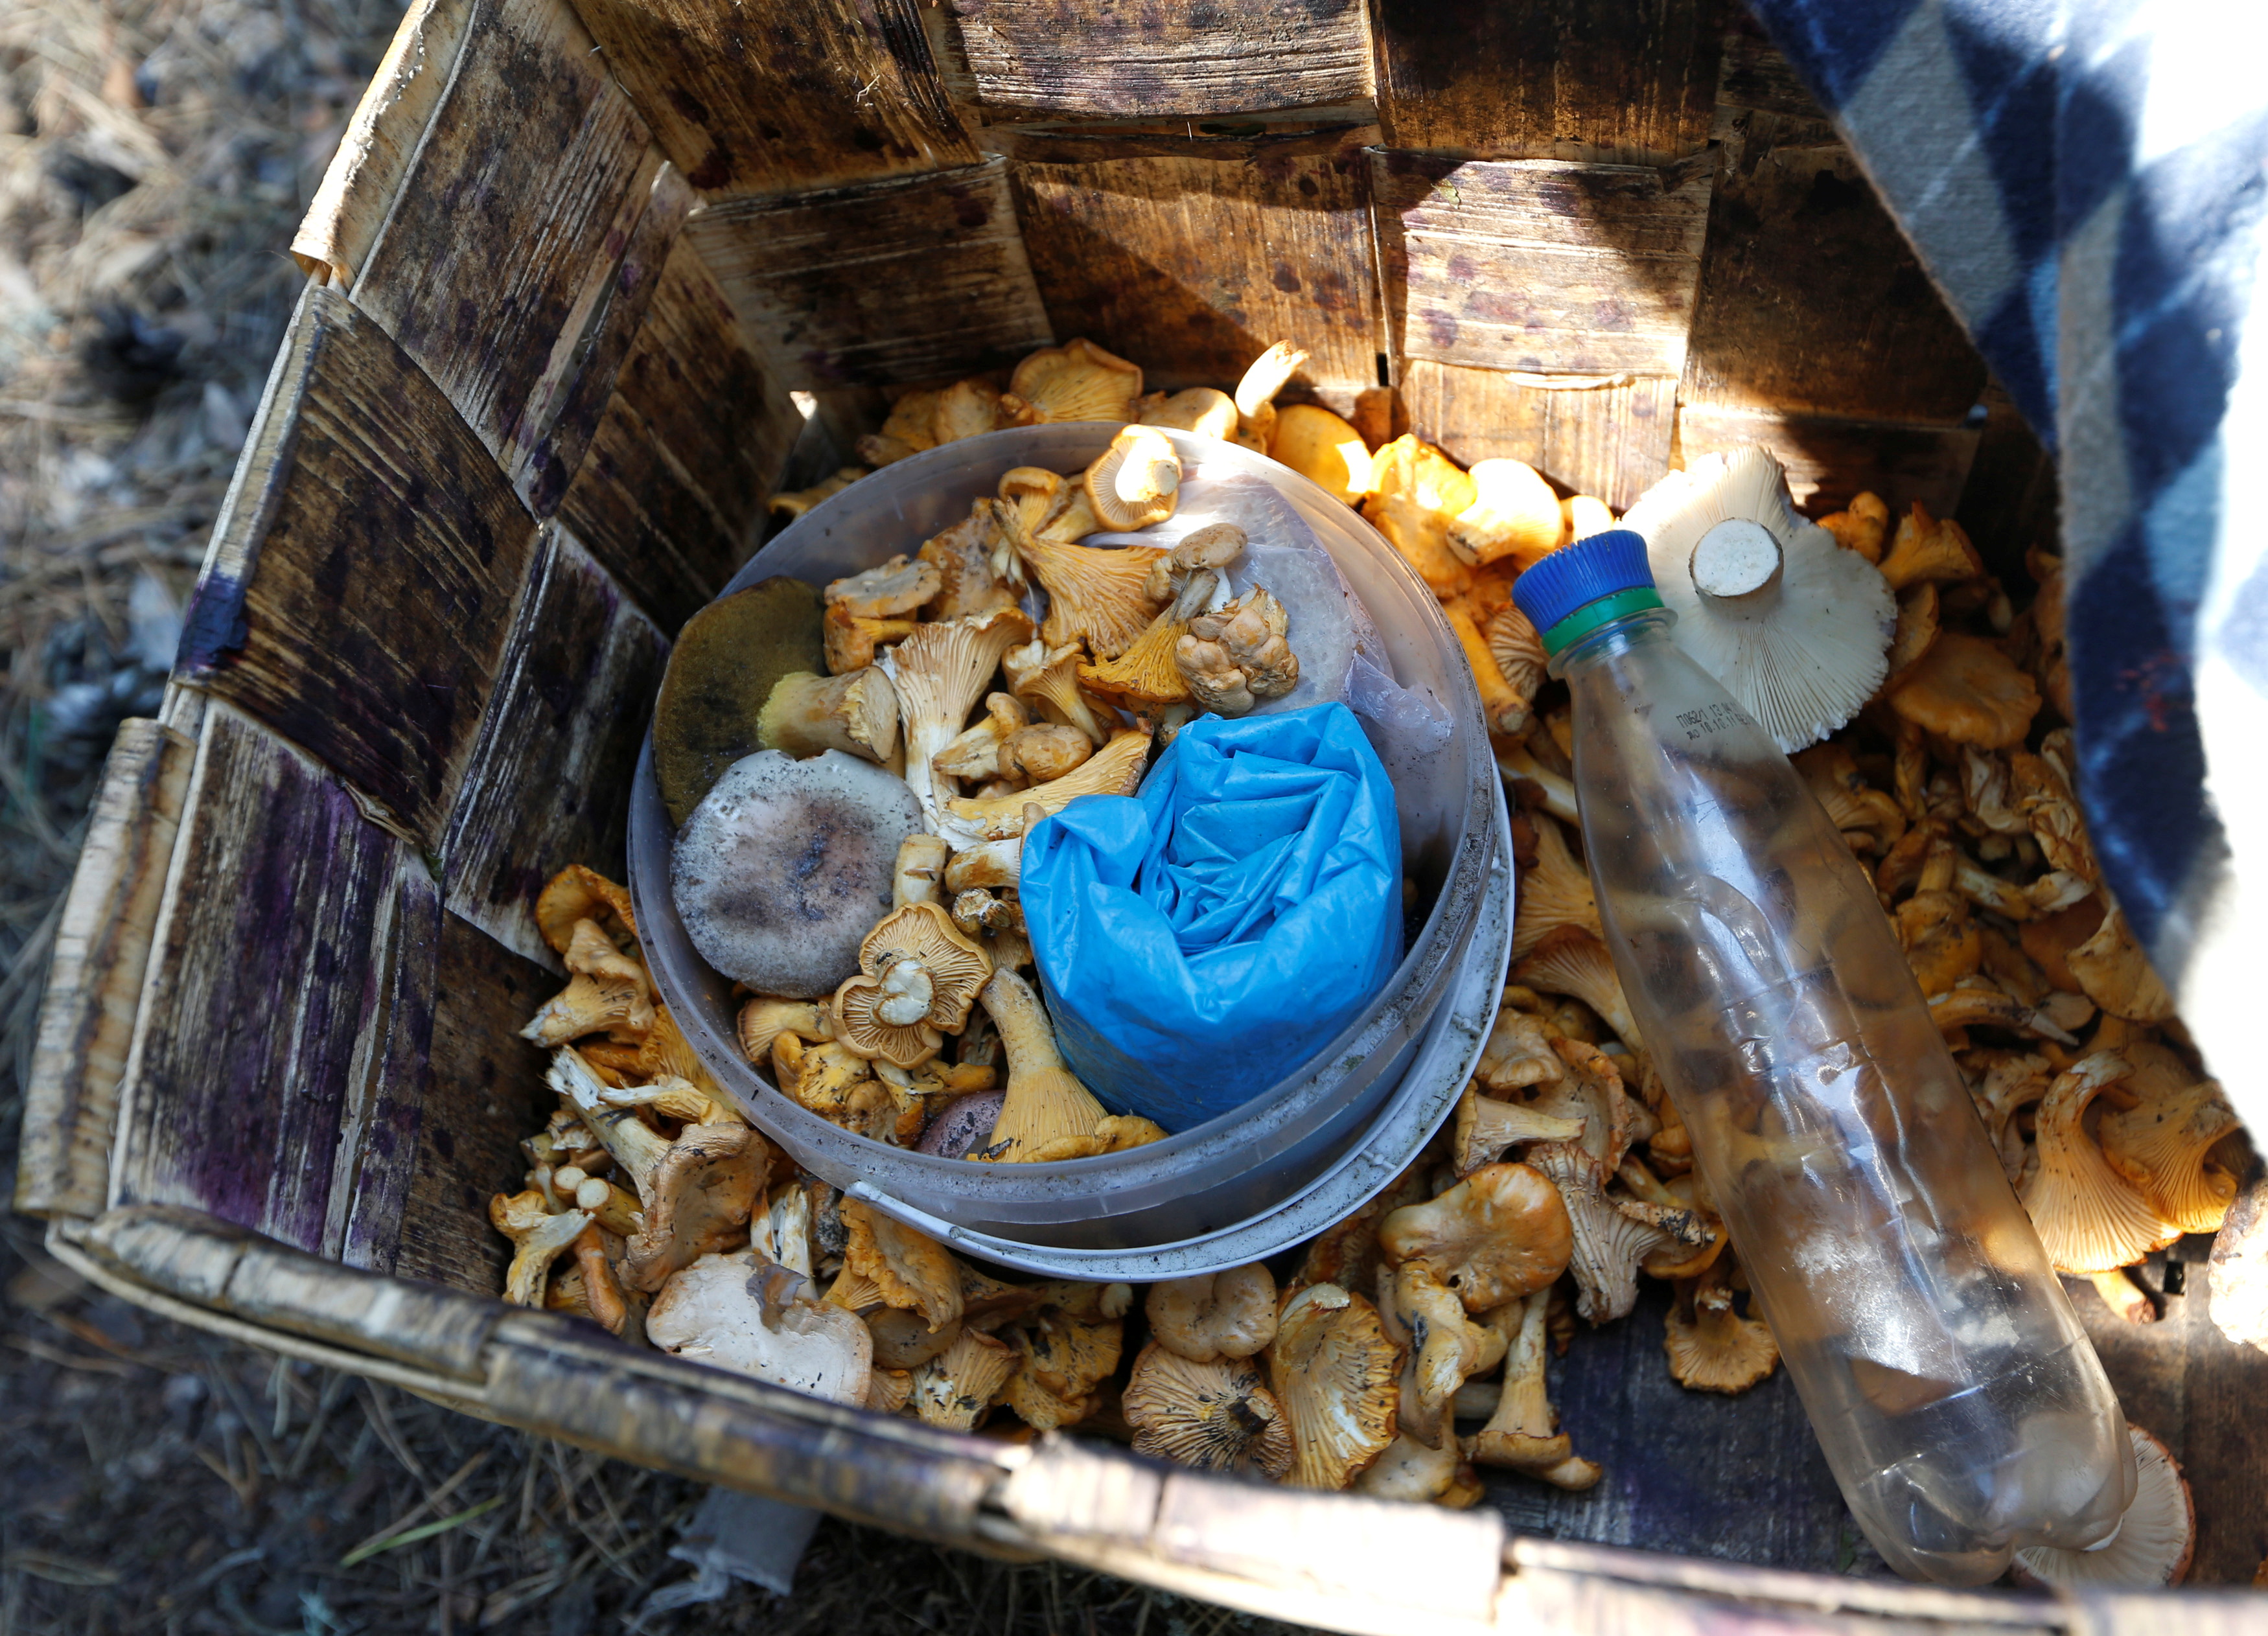 Mushrooms in a box are seen in a Belarussian part of the forest near the border between Ukraine and Belarus, near the village of Dzerzhinsk, south of Minsk, July 18, 2014. REUTERS/Vasily Fedosenko/File Photo